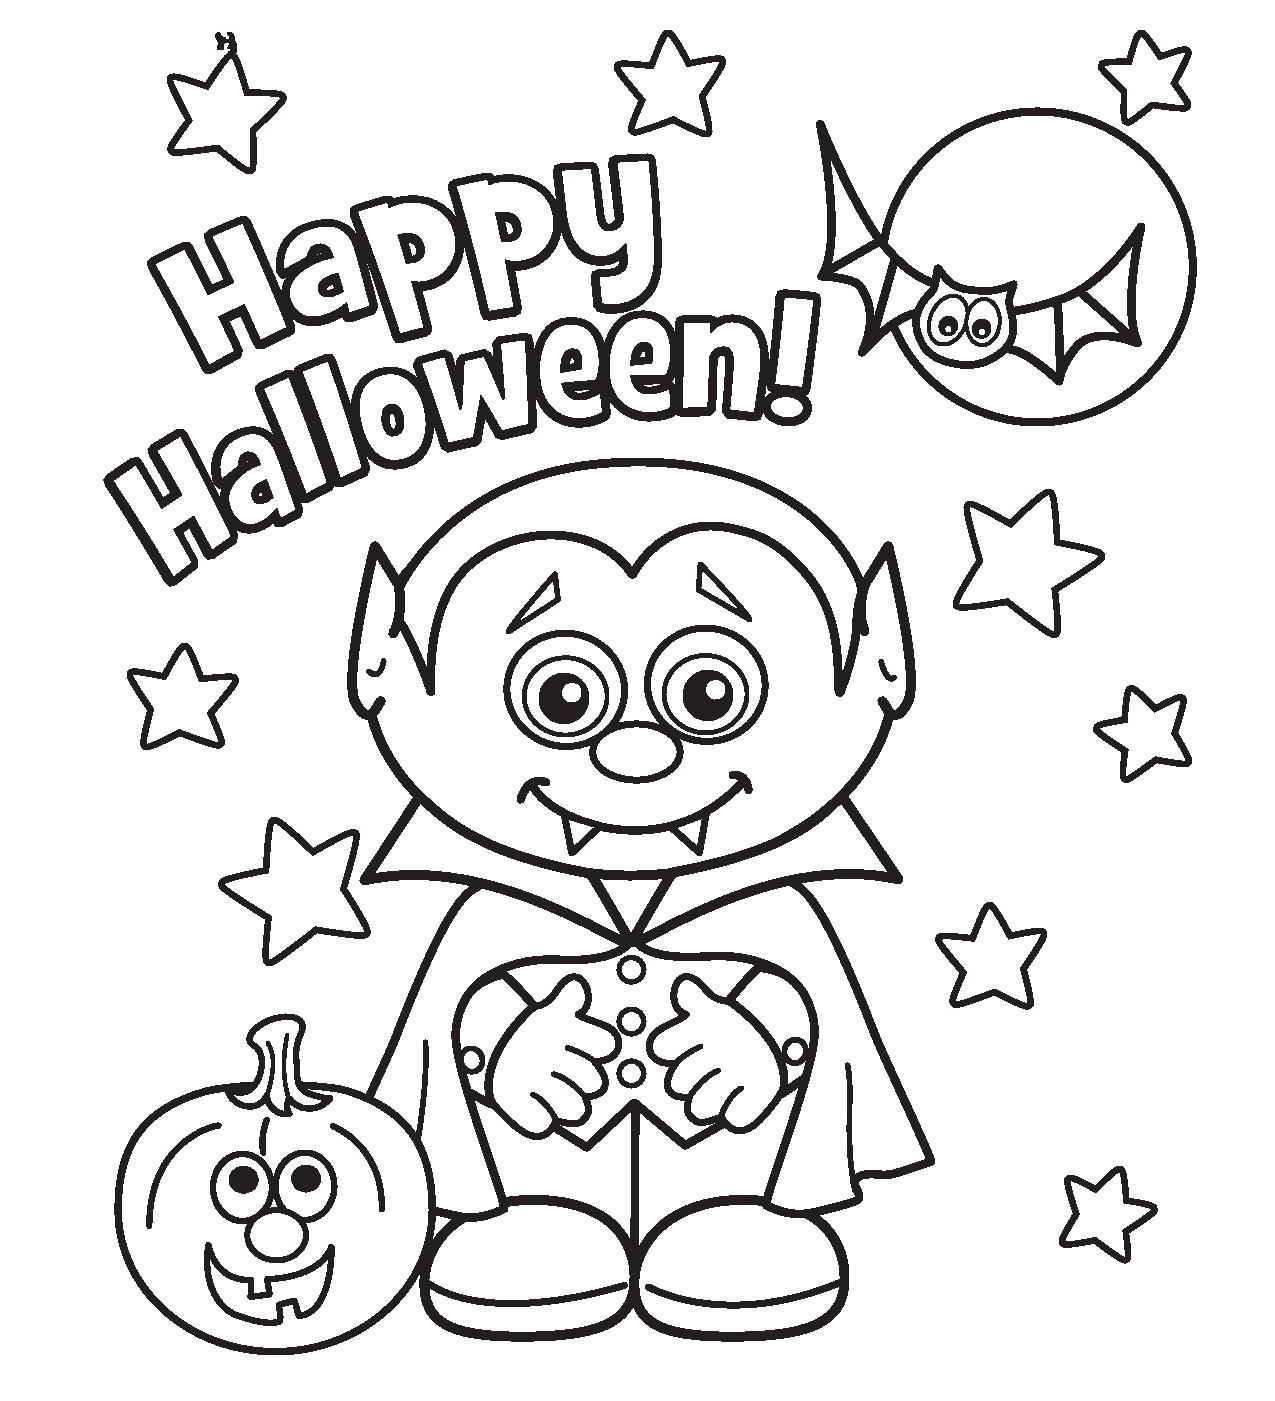 Halloween coloring pages to download and print for free